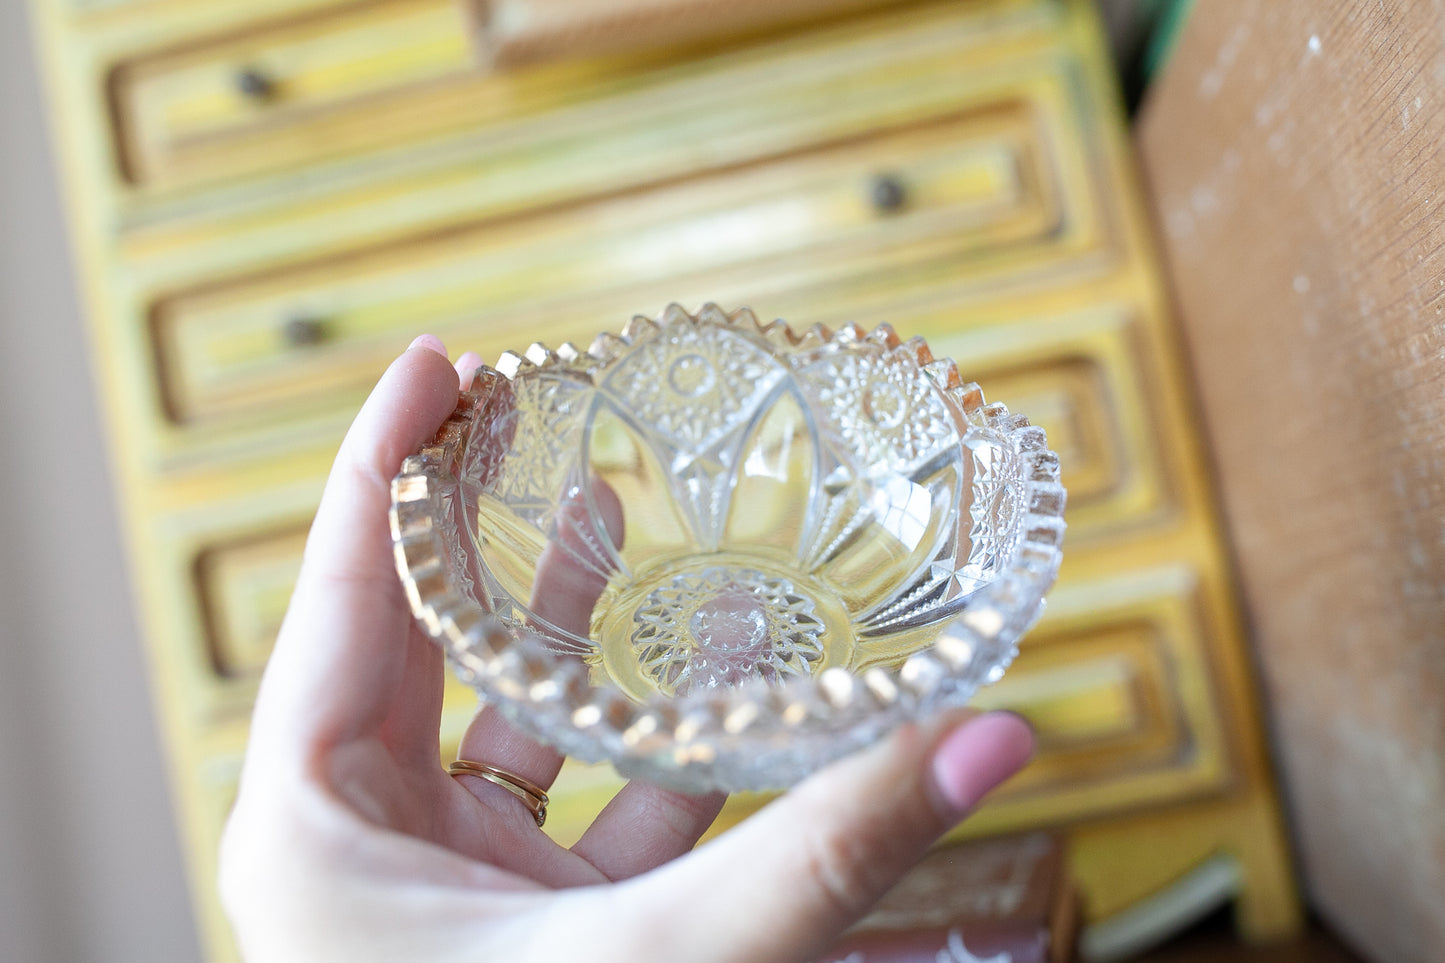 Vintage Mini Punch Bowl - Doll Sized Punch Bowl